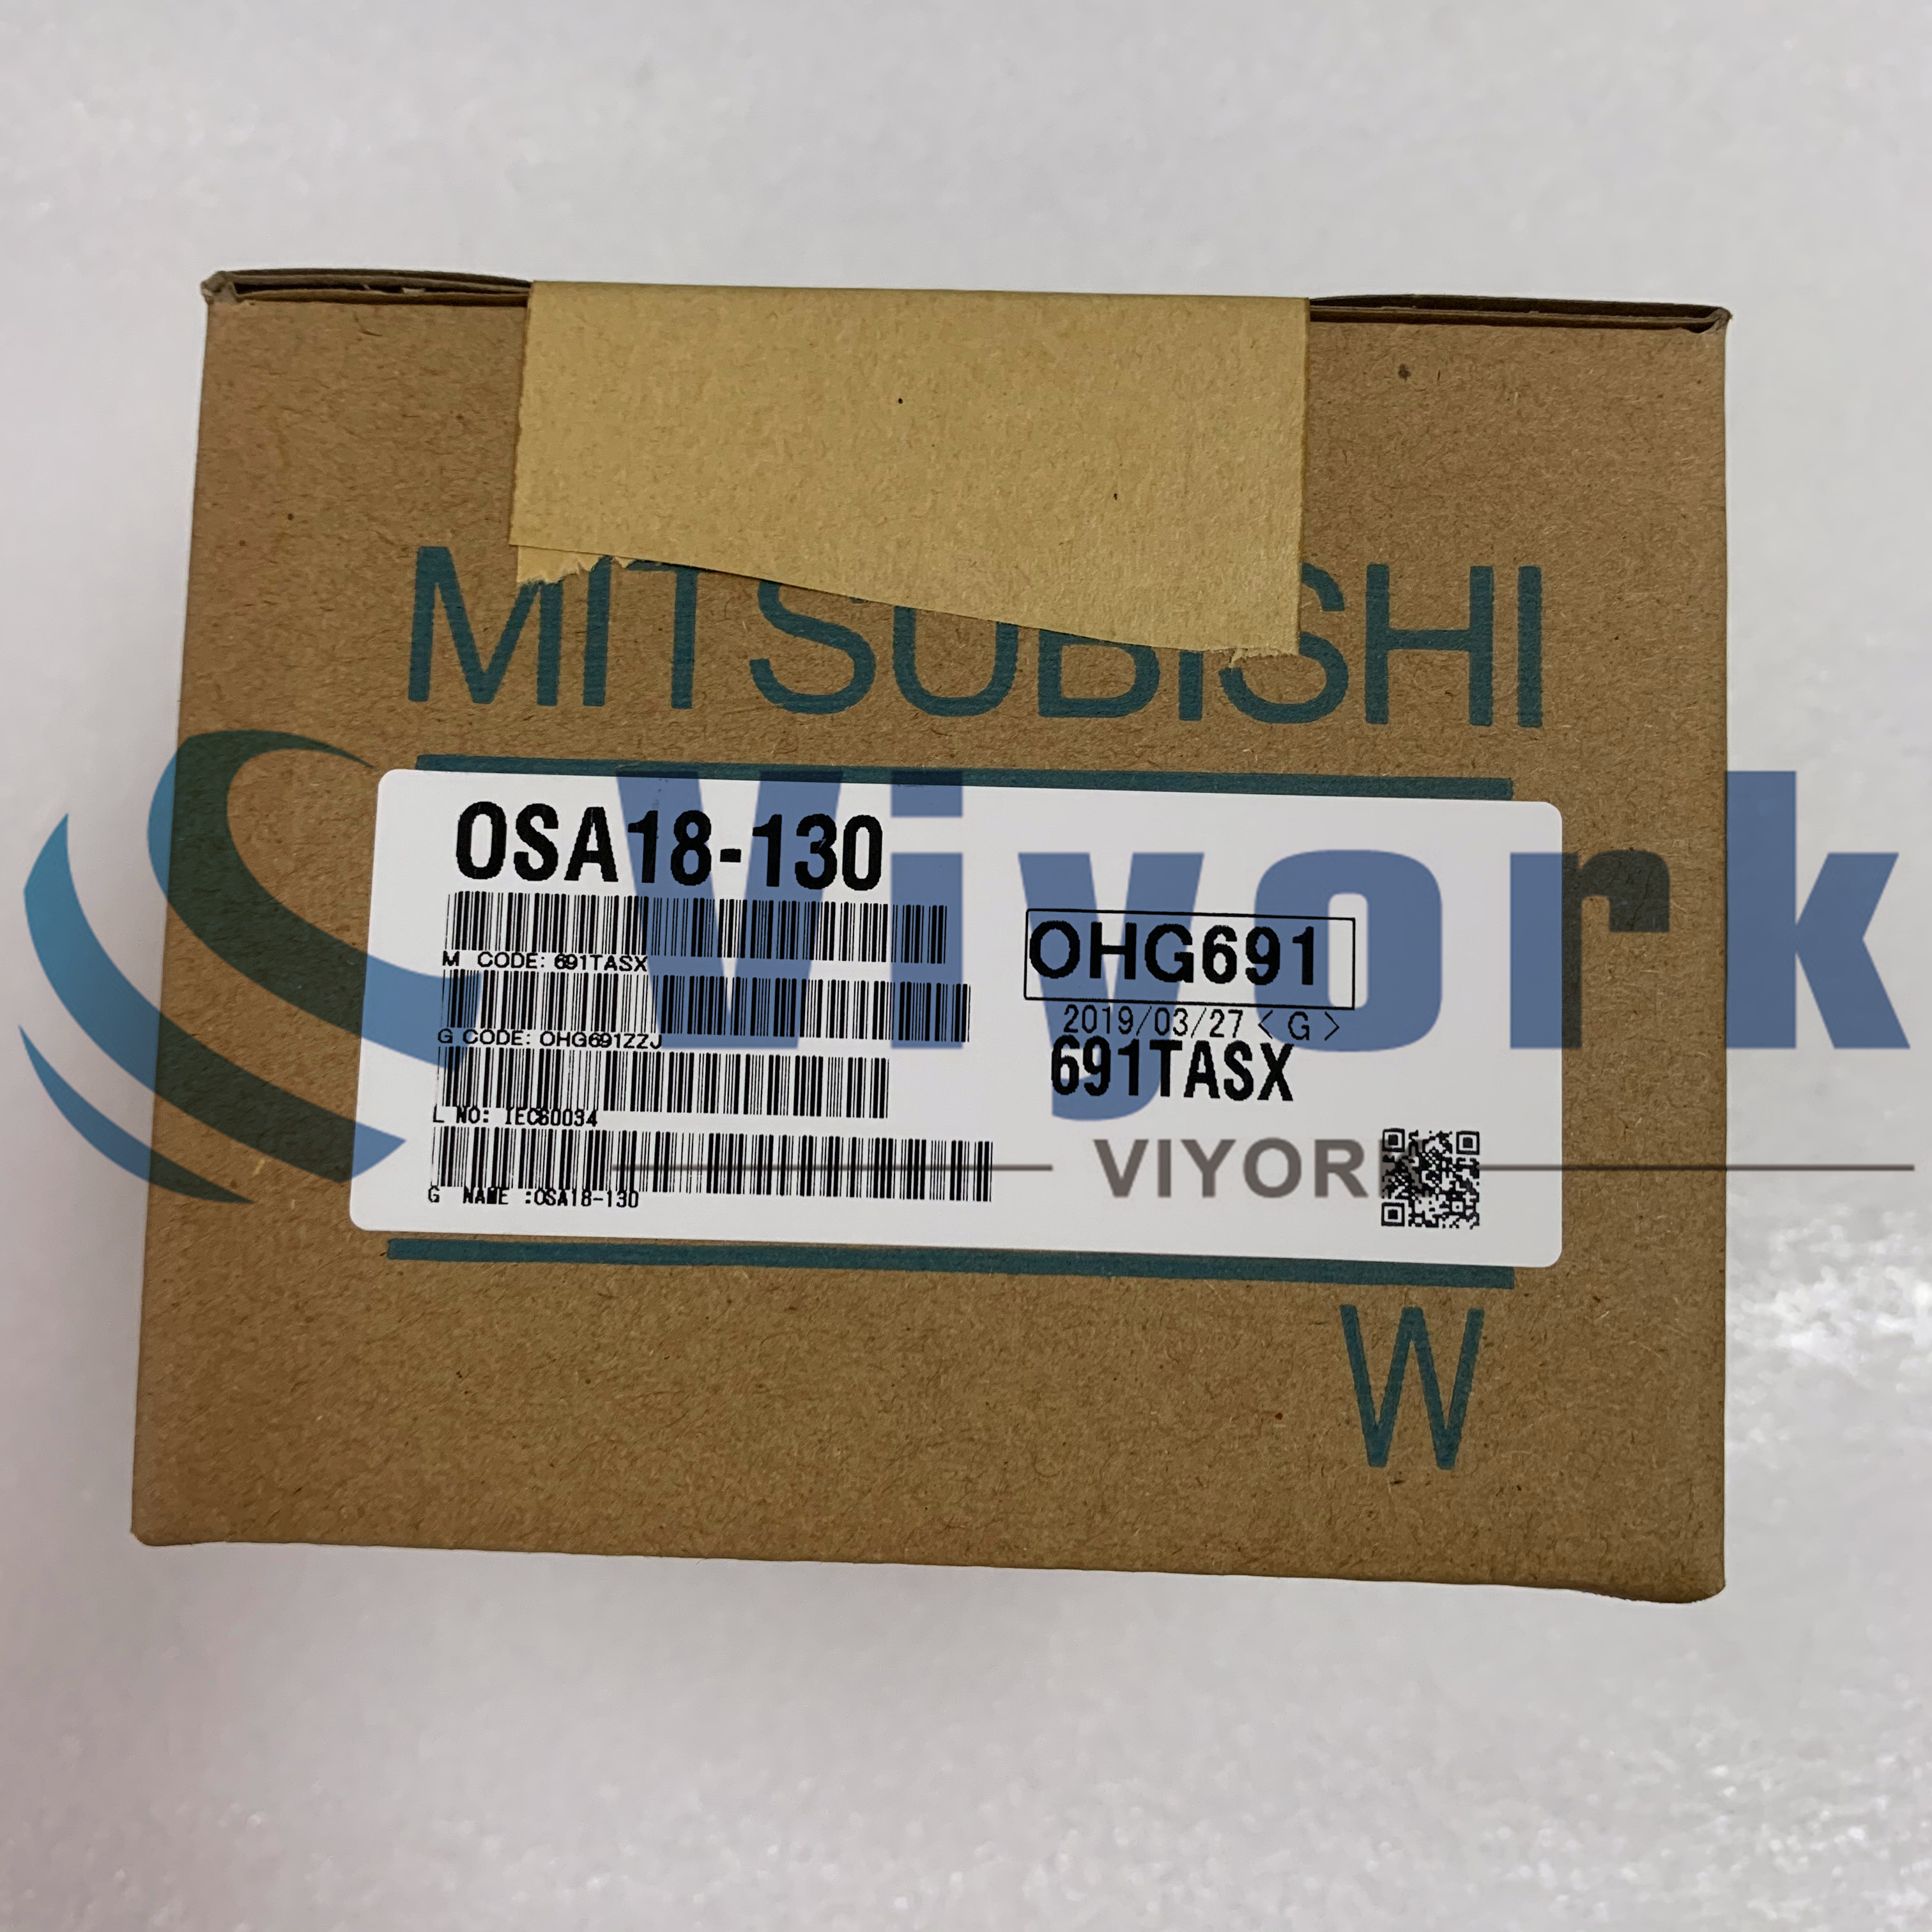 Mitsubishi OSA18-130 ABSOLUTE ENCODER FOR SERVO DEVICES NEW